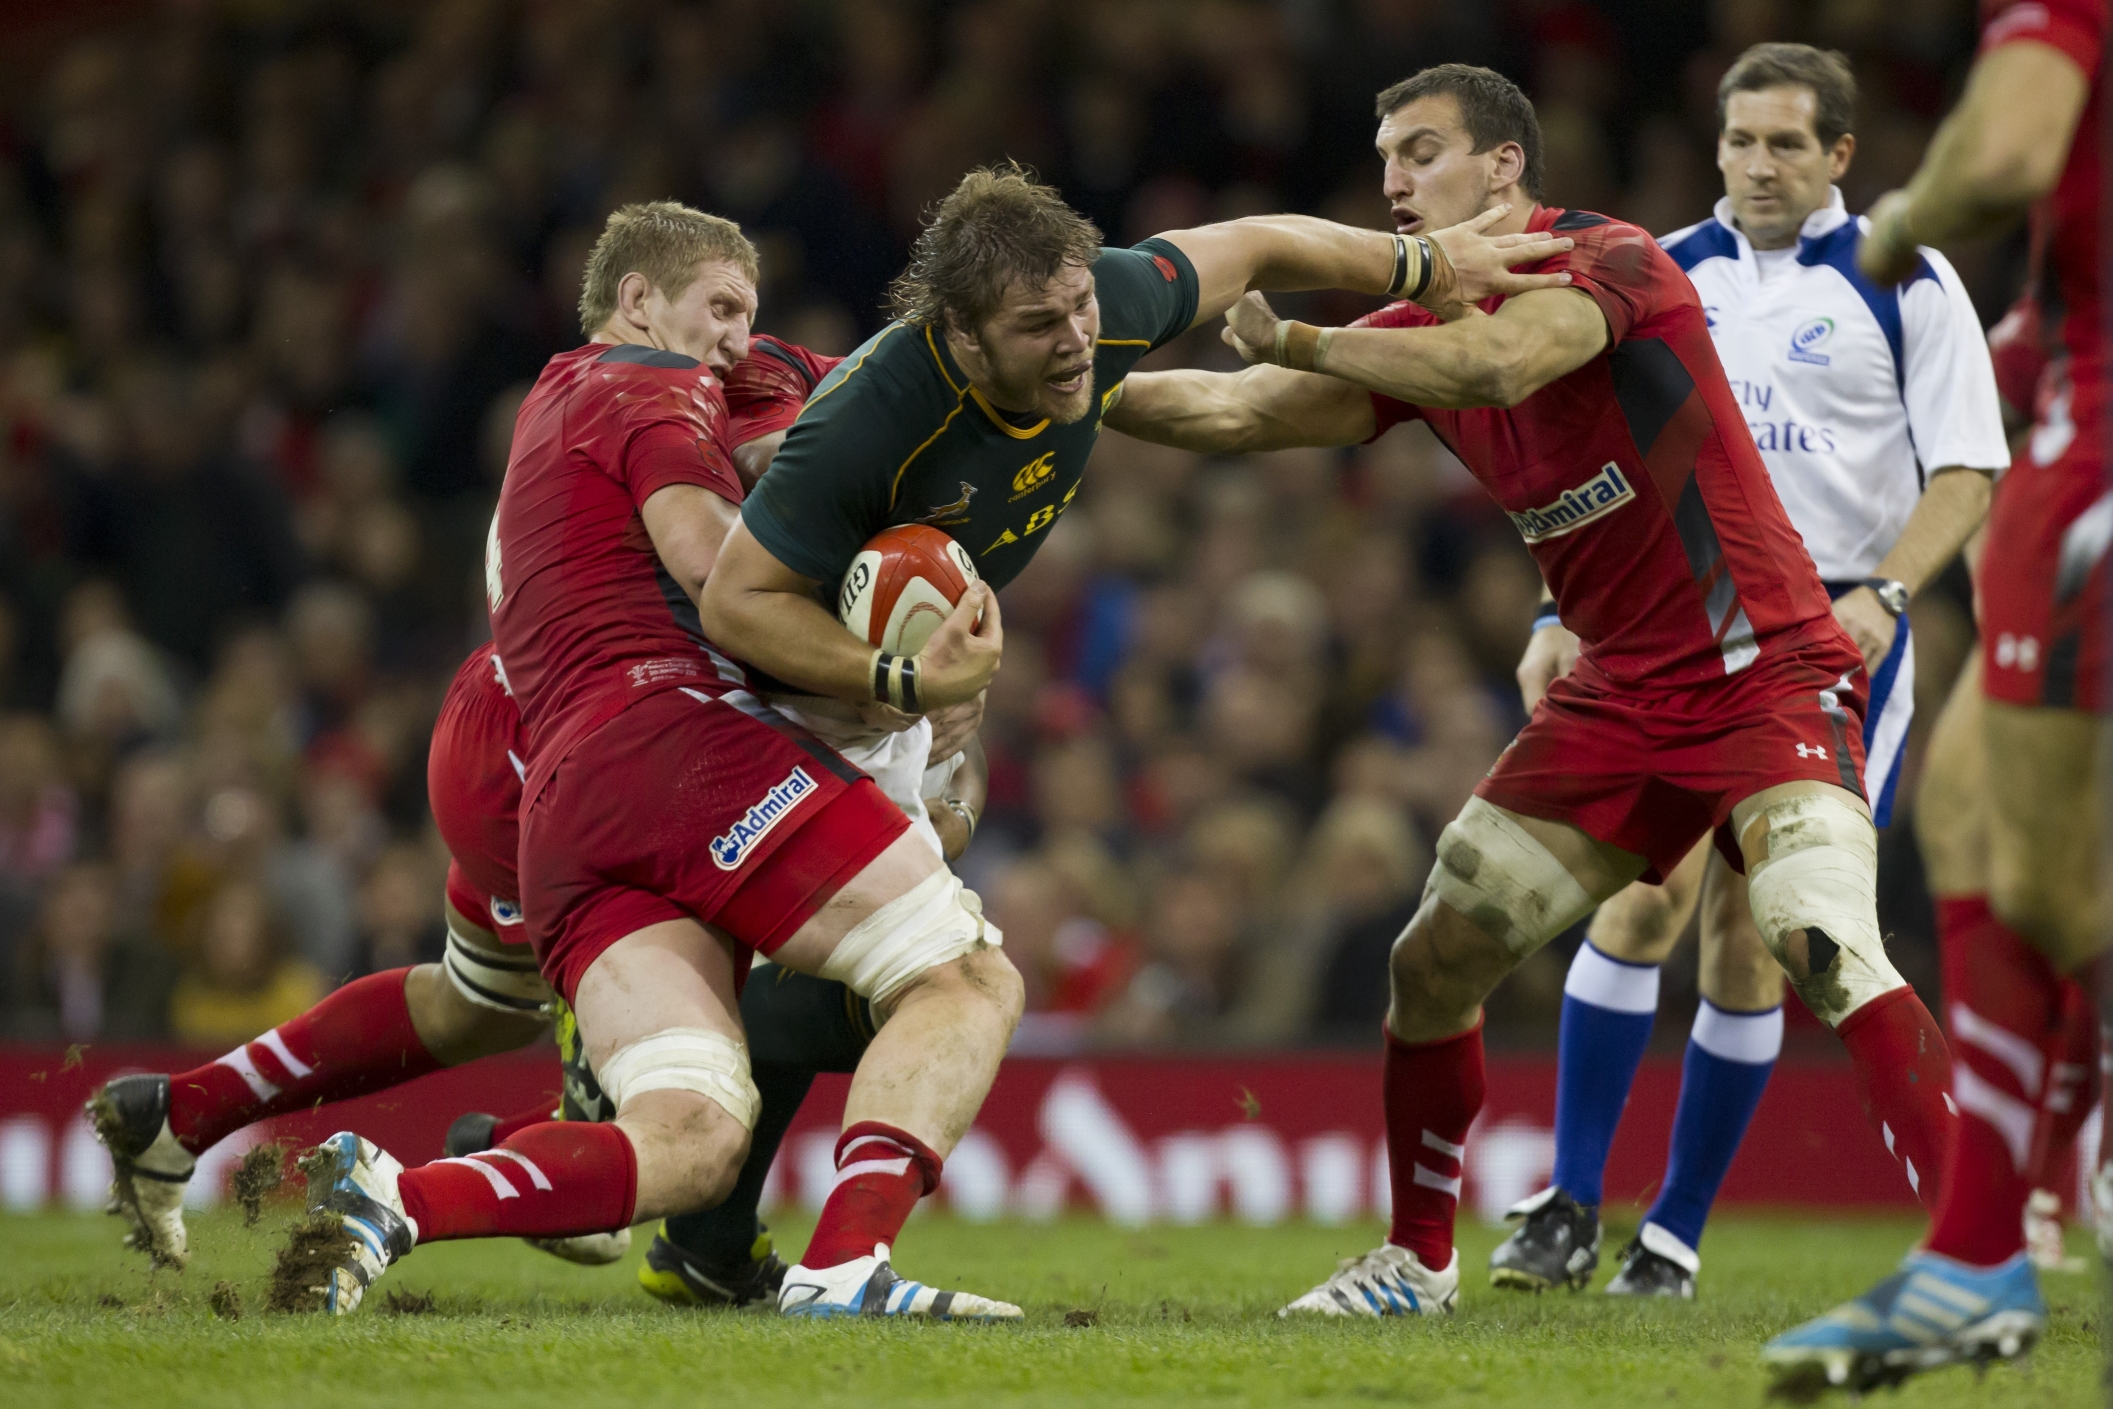 South Africa's Duane Vermeulen is tackled by Wales' Sam Warburton and Bradley Davies during at the Millennium Stadium, Cardiff, on Saturday. Photo: AP